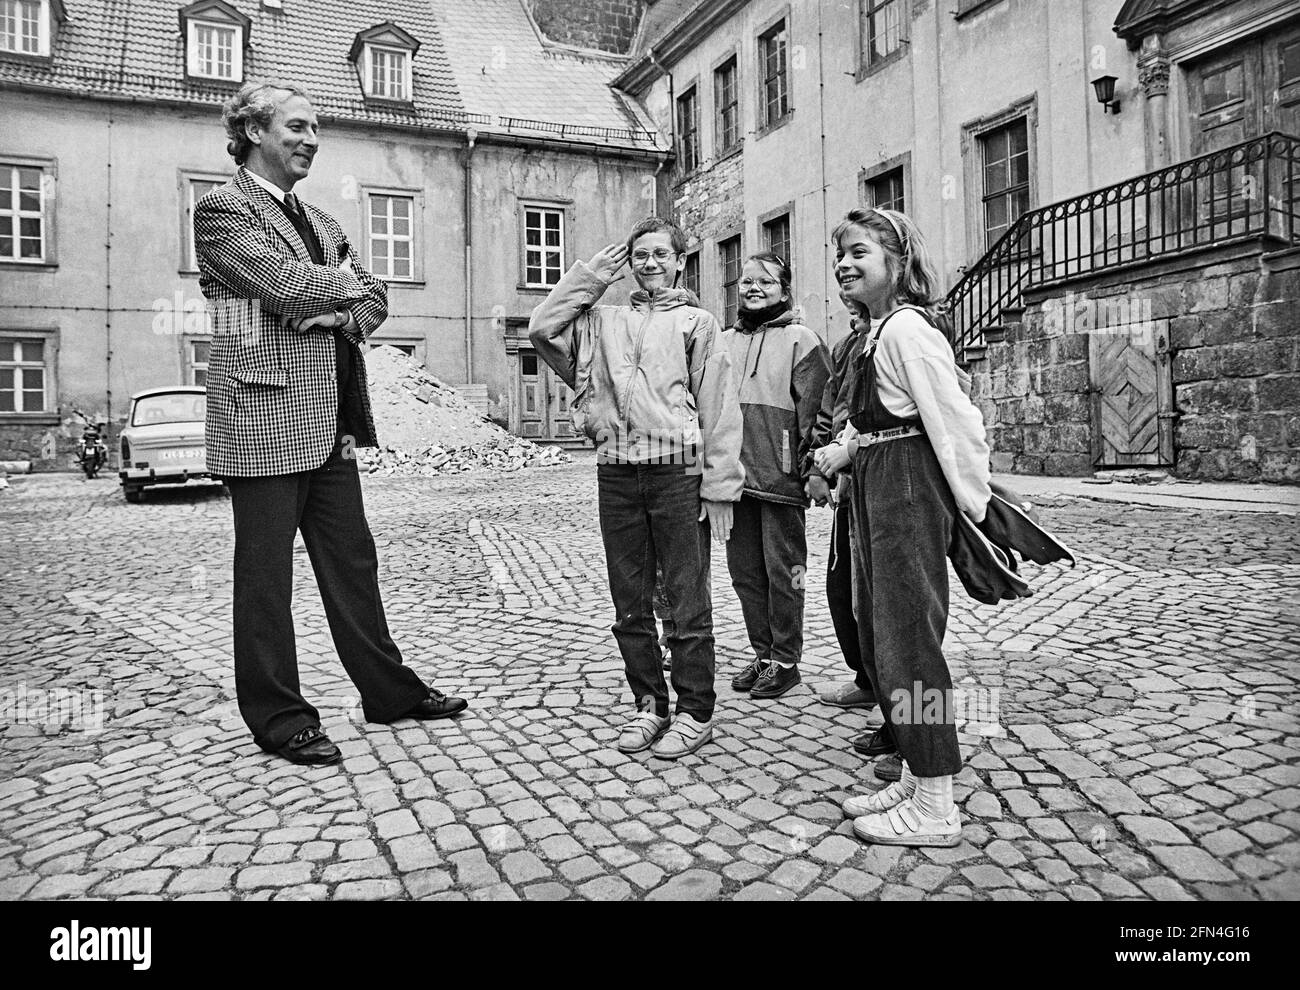 A boy salutes the welcome of Eduard Prince of Anhalt at Ballenstedt Castle. The prince is trying to regain possession of his parents' former residence Stock Photo